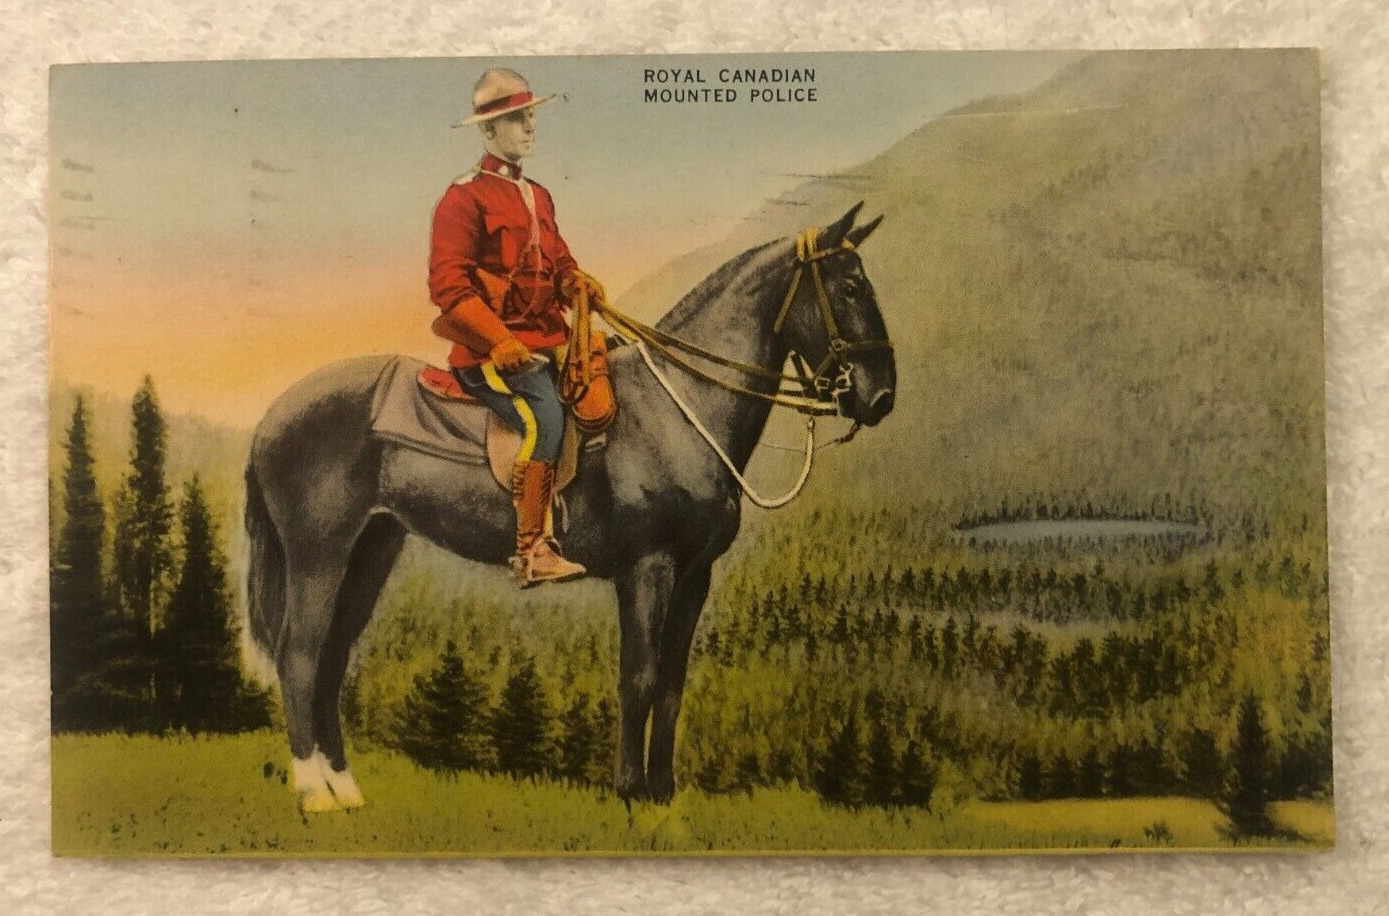 Toronto Ontario-Canada, Royal Canadian Mounted Police, posted 1948, Post Card